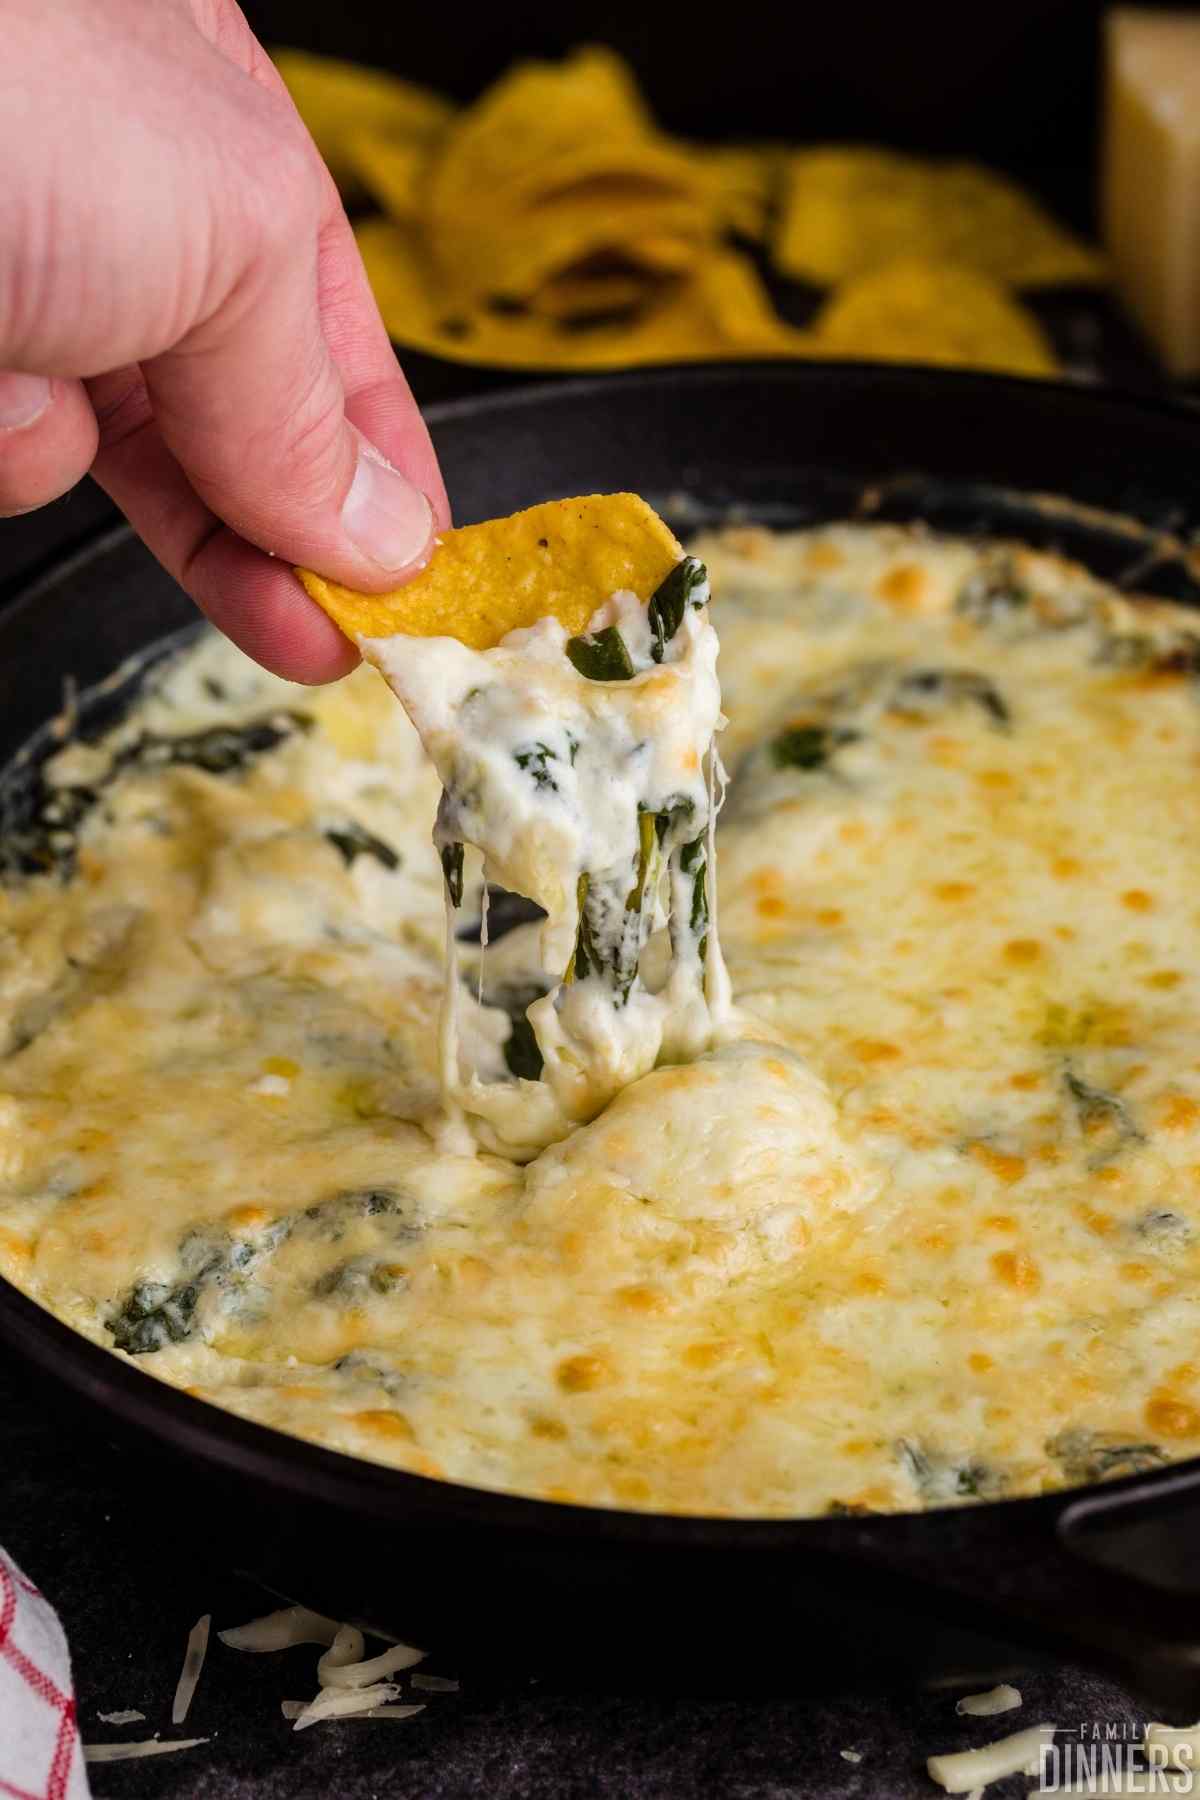 yellow corn chip being dipped into hot cheesy spinach and artichoke dip in a black cast iron pan